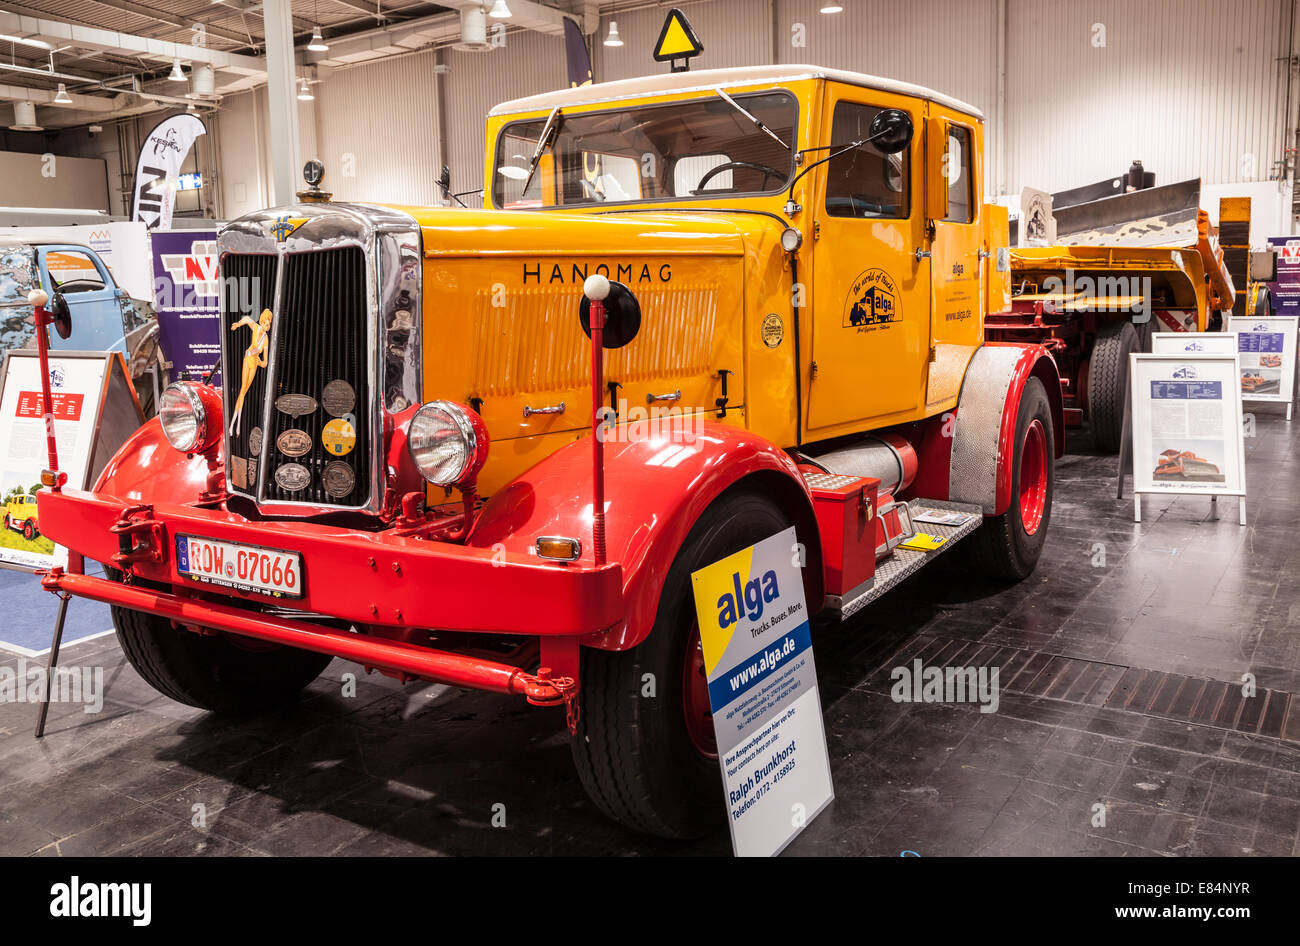 Historic HANOMAG HENSCHEL truck at the 65th IAA Commercial Vehicles Fair 2014 in Hannover, Germany Stock Photo